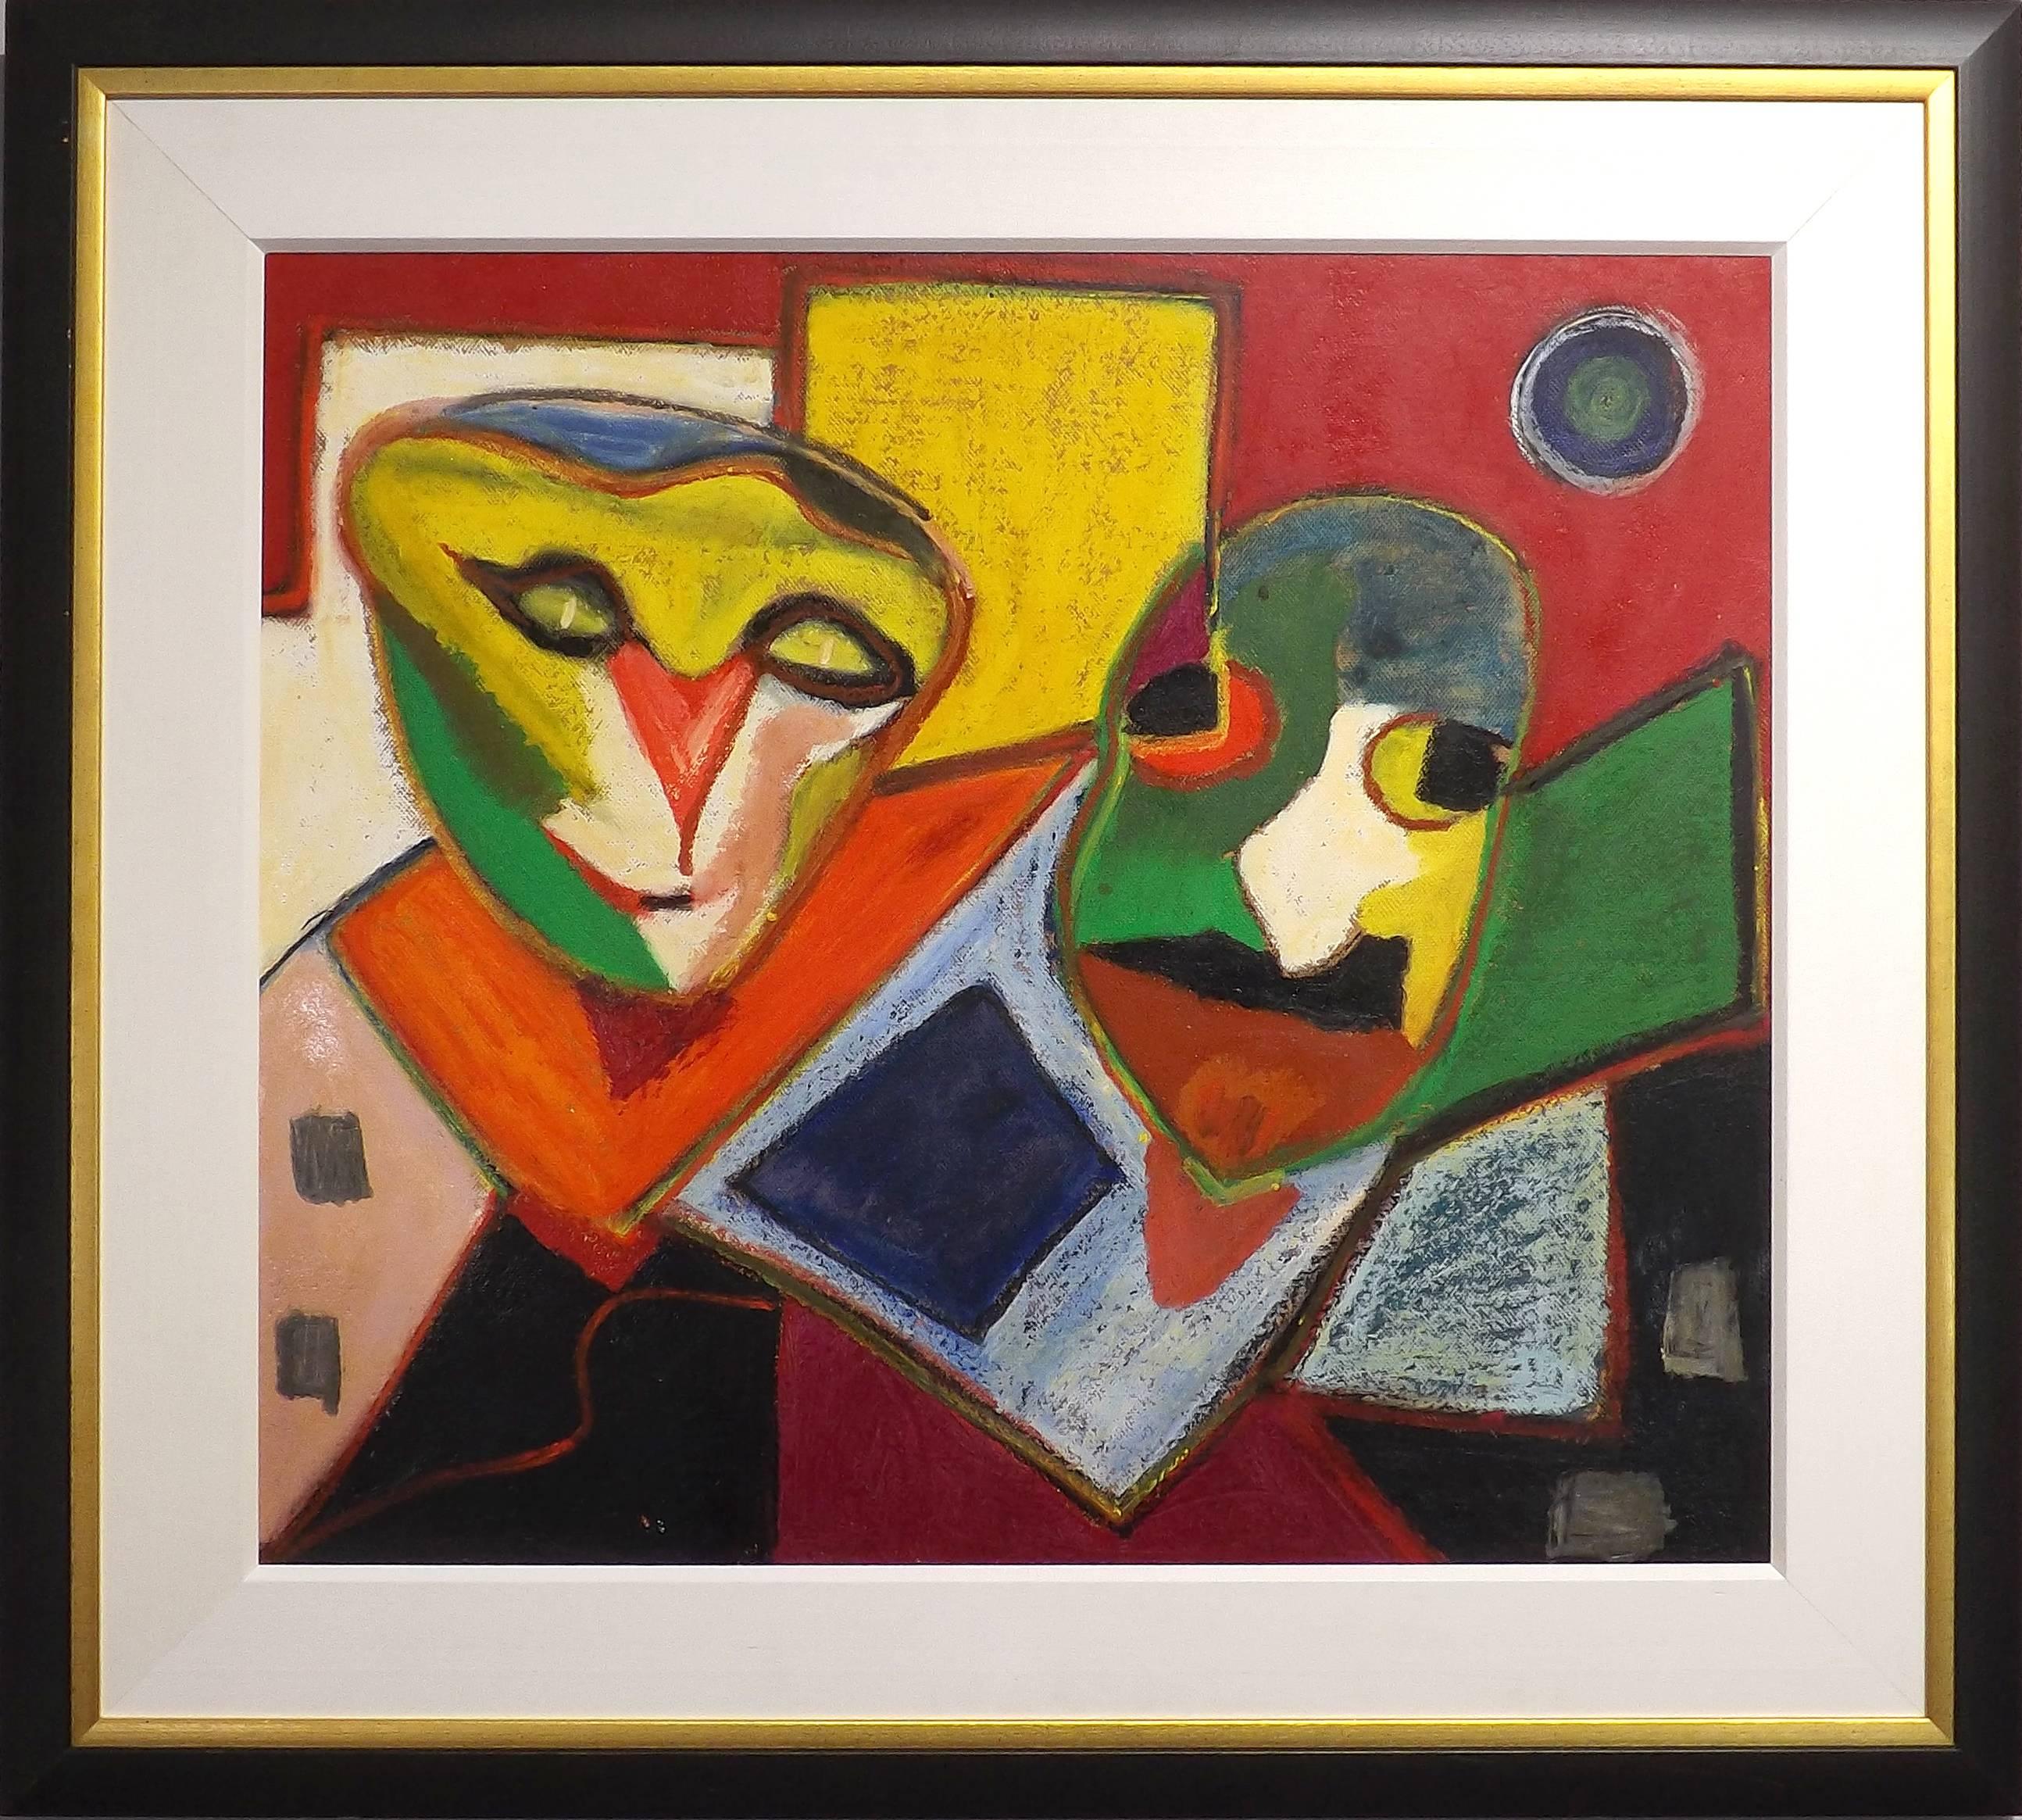 A delightful abstract painting of two festive figures who appear to be wearing masks, painted by Dutch outsider Janna Straus van de Geest (1930-1999). Janna was born in 1930 and was active in the city of Utrecht in the Netherlands, where she had her